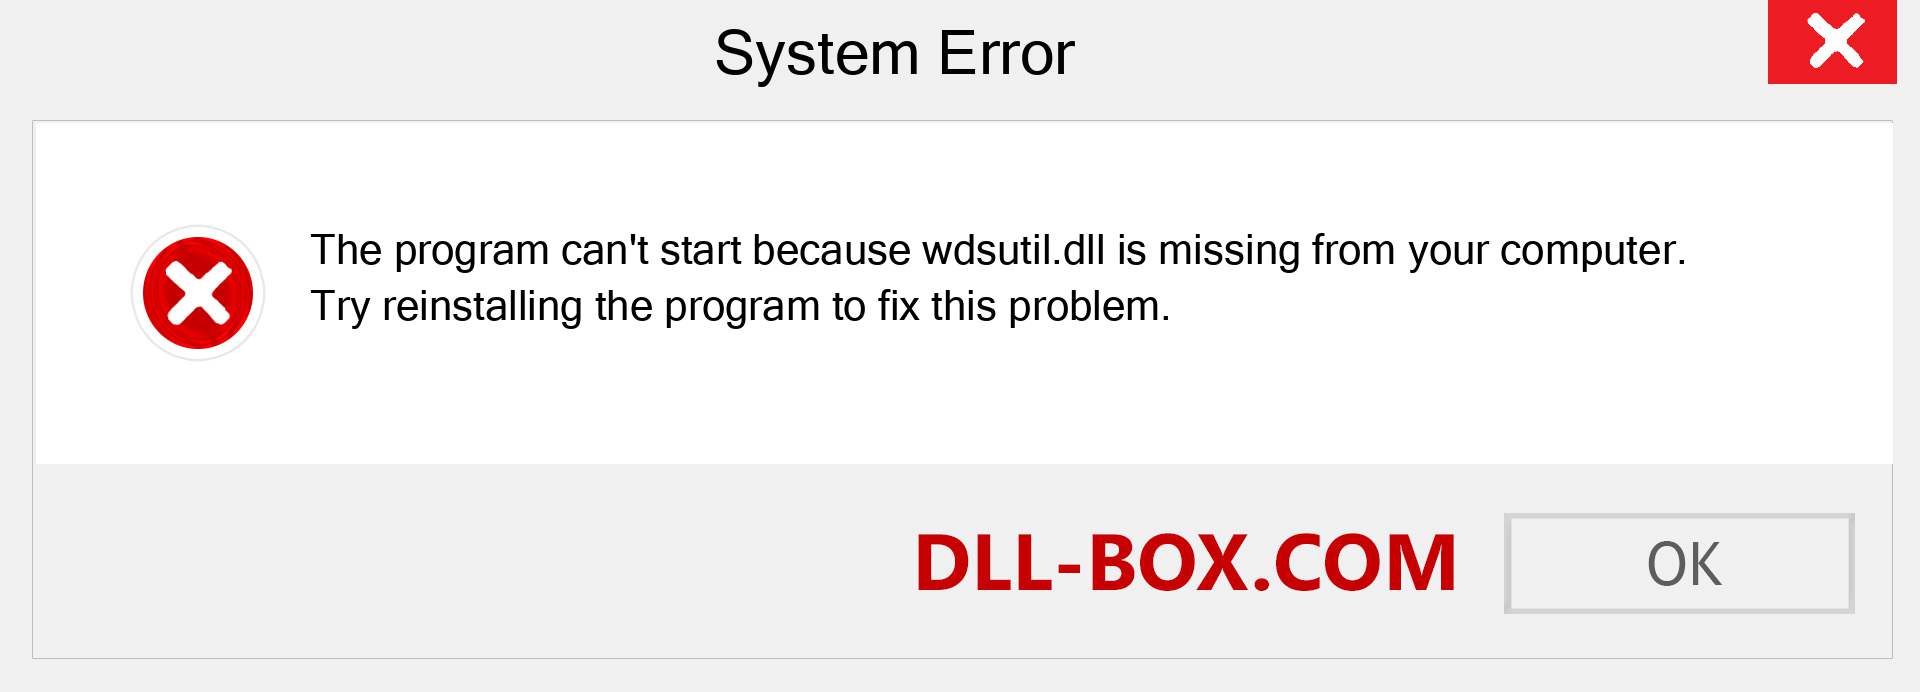  wdsutil.dll file is missing?. Download for Windows 7, 8, 10 - Fix  wdsutil dll Missing Error on Windows, photos, images